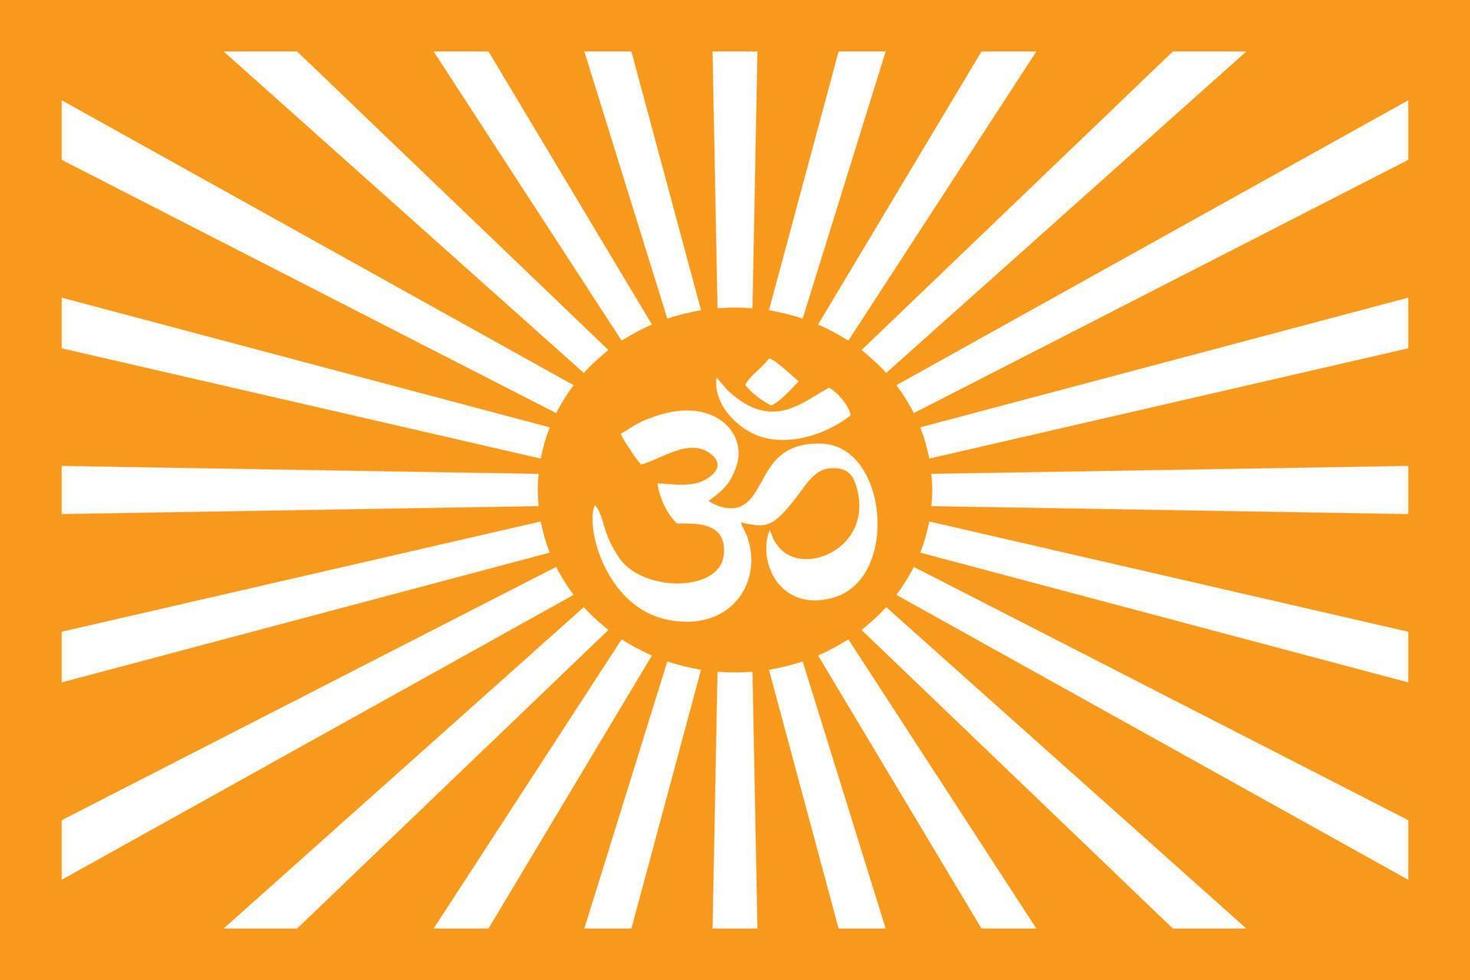 OM design concept for Temples, Houses and for interior works etc. vector